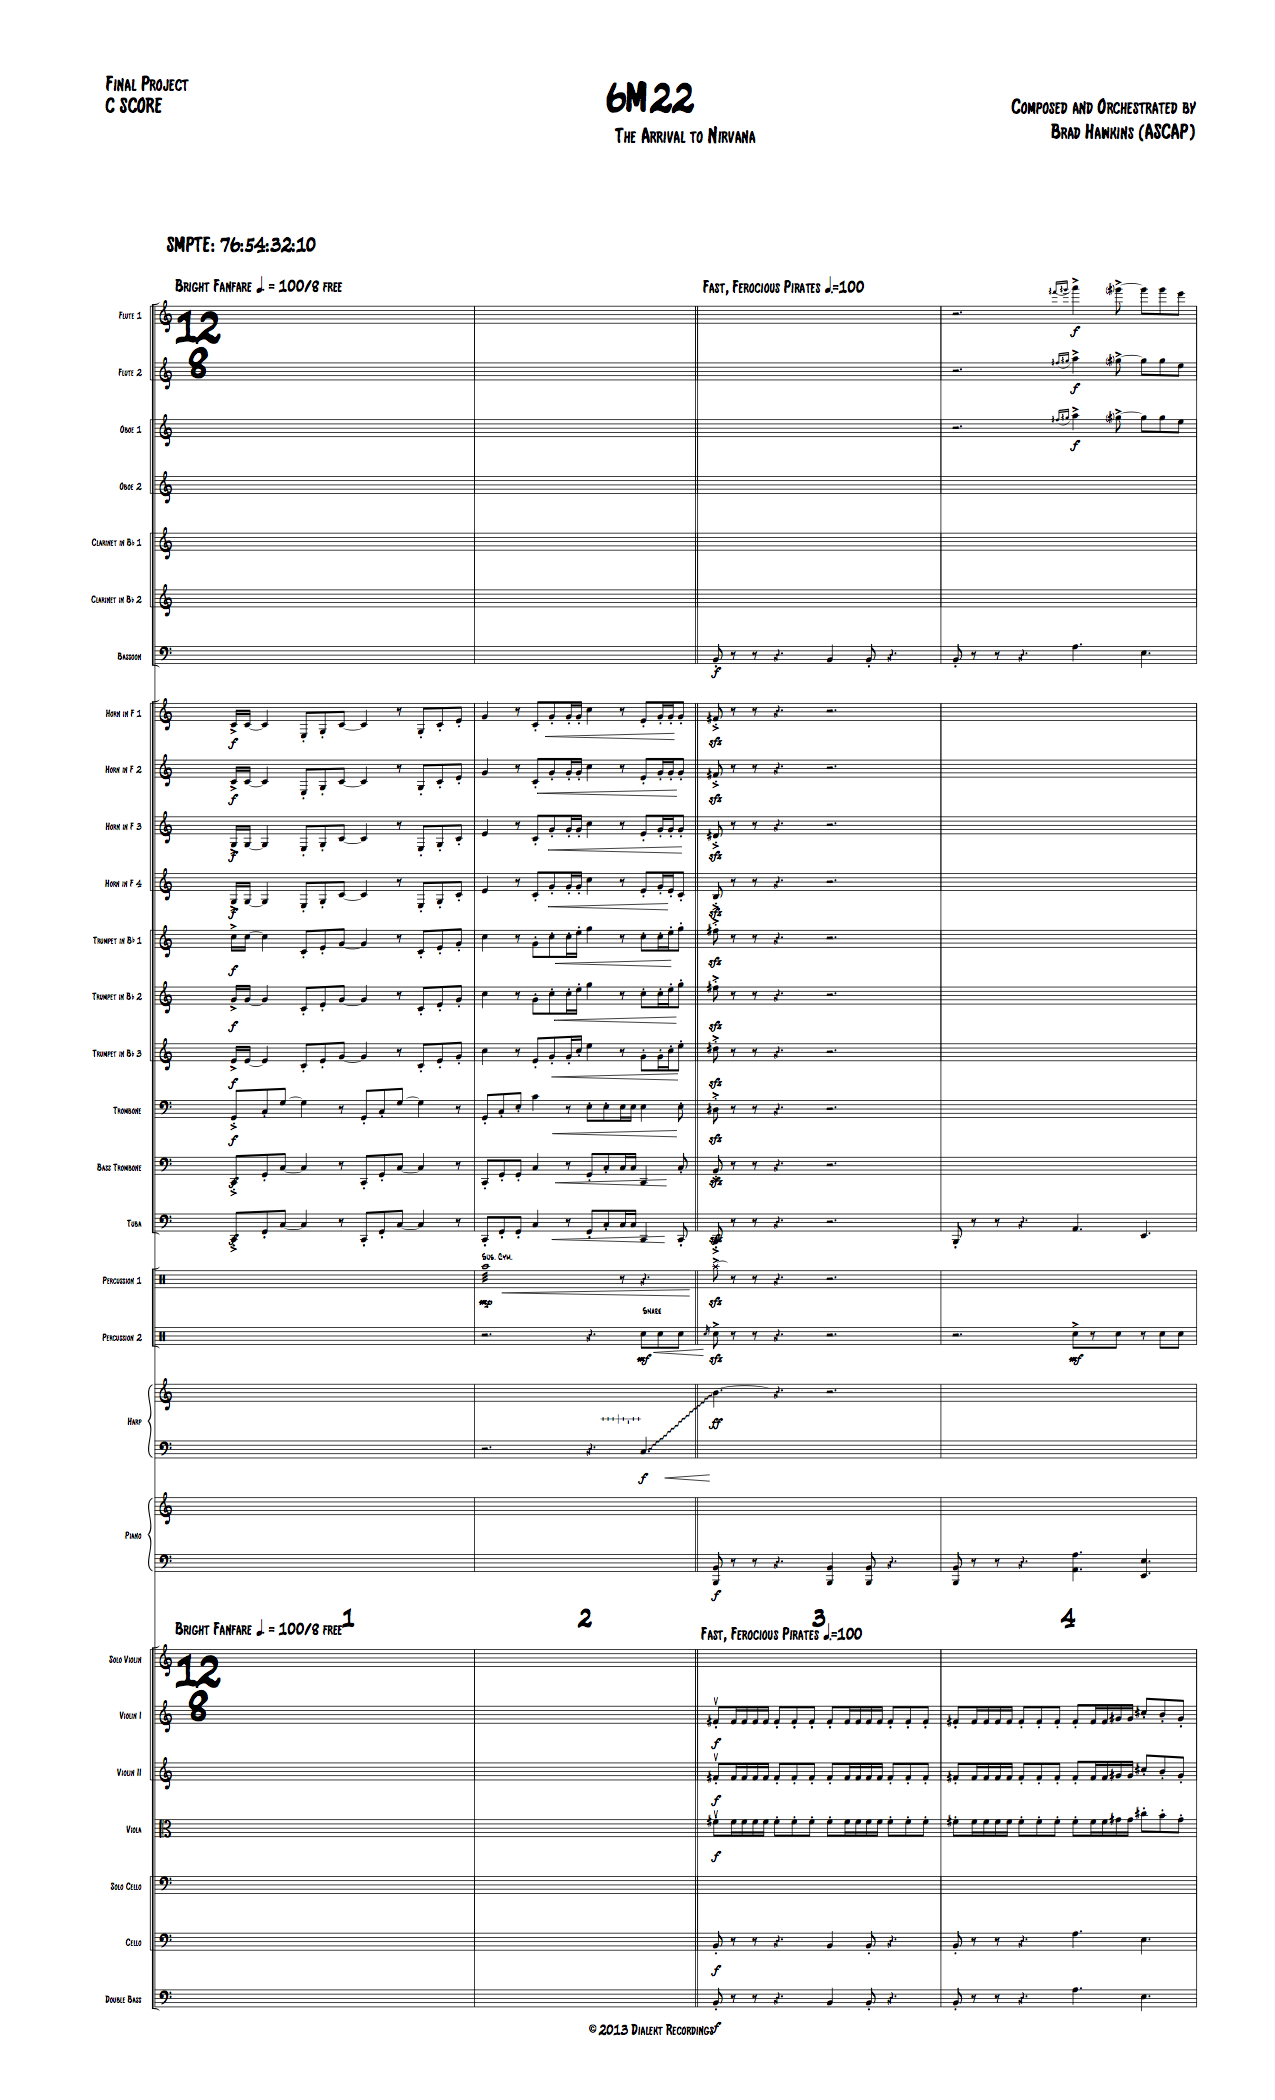 Final Project Full Orchestration Final.jpg